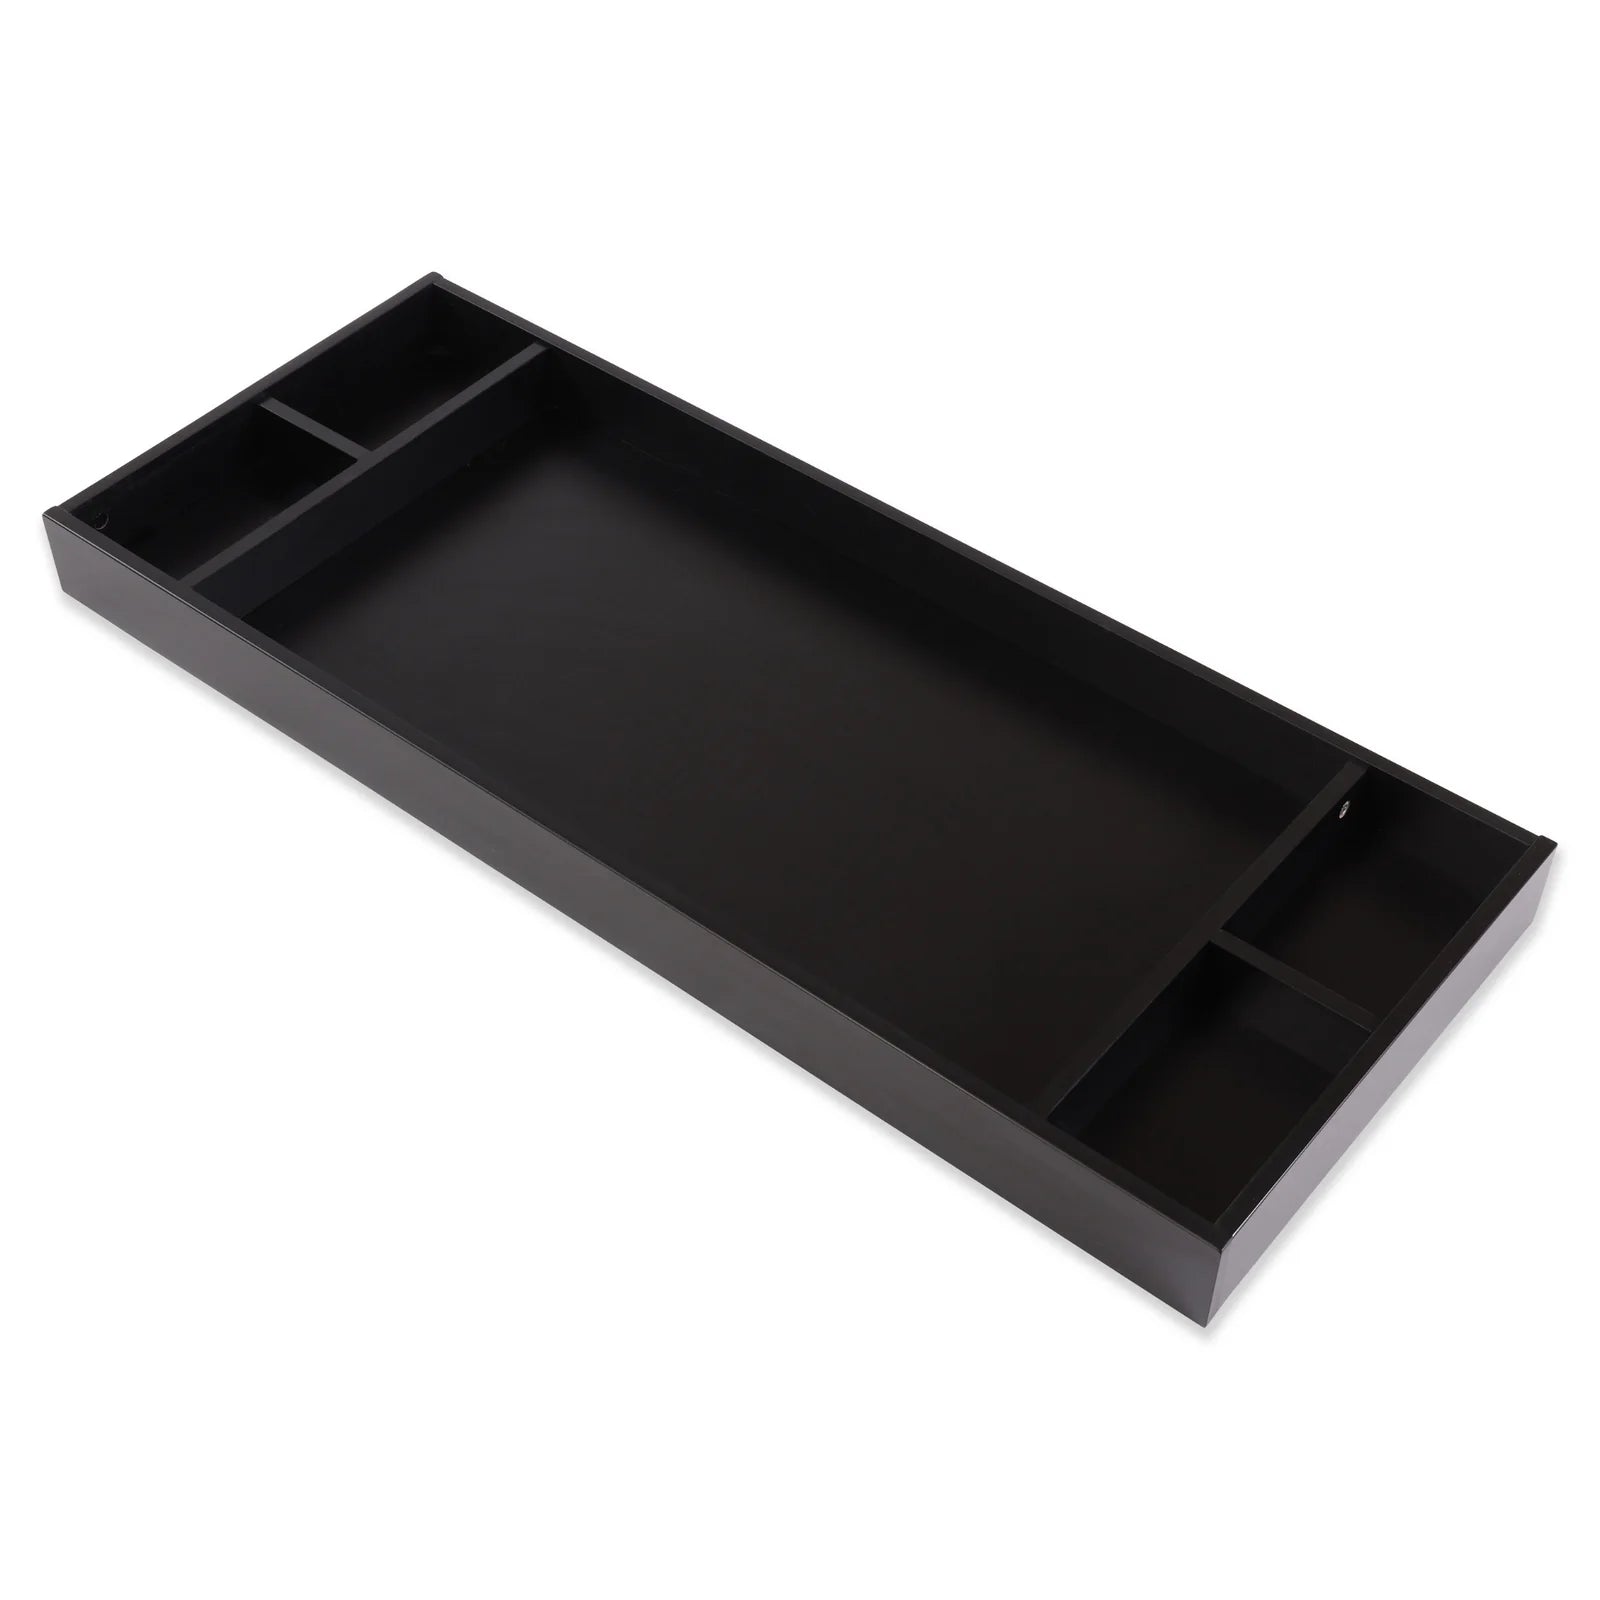 Dadada Removable Changing Tray for 48" Soho / Bliss / Merry / Chicago Dressers